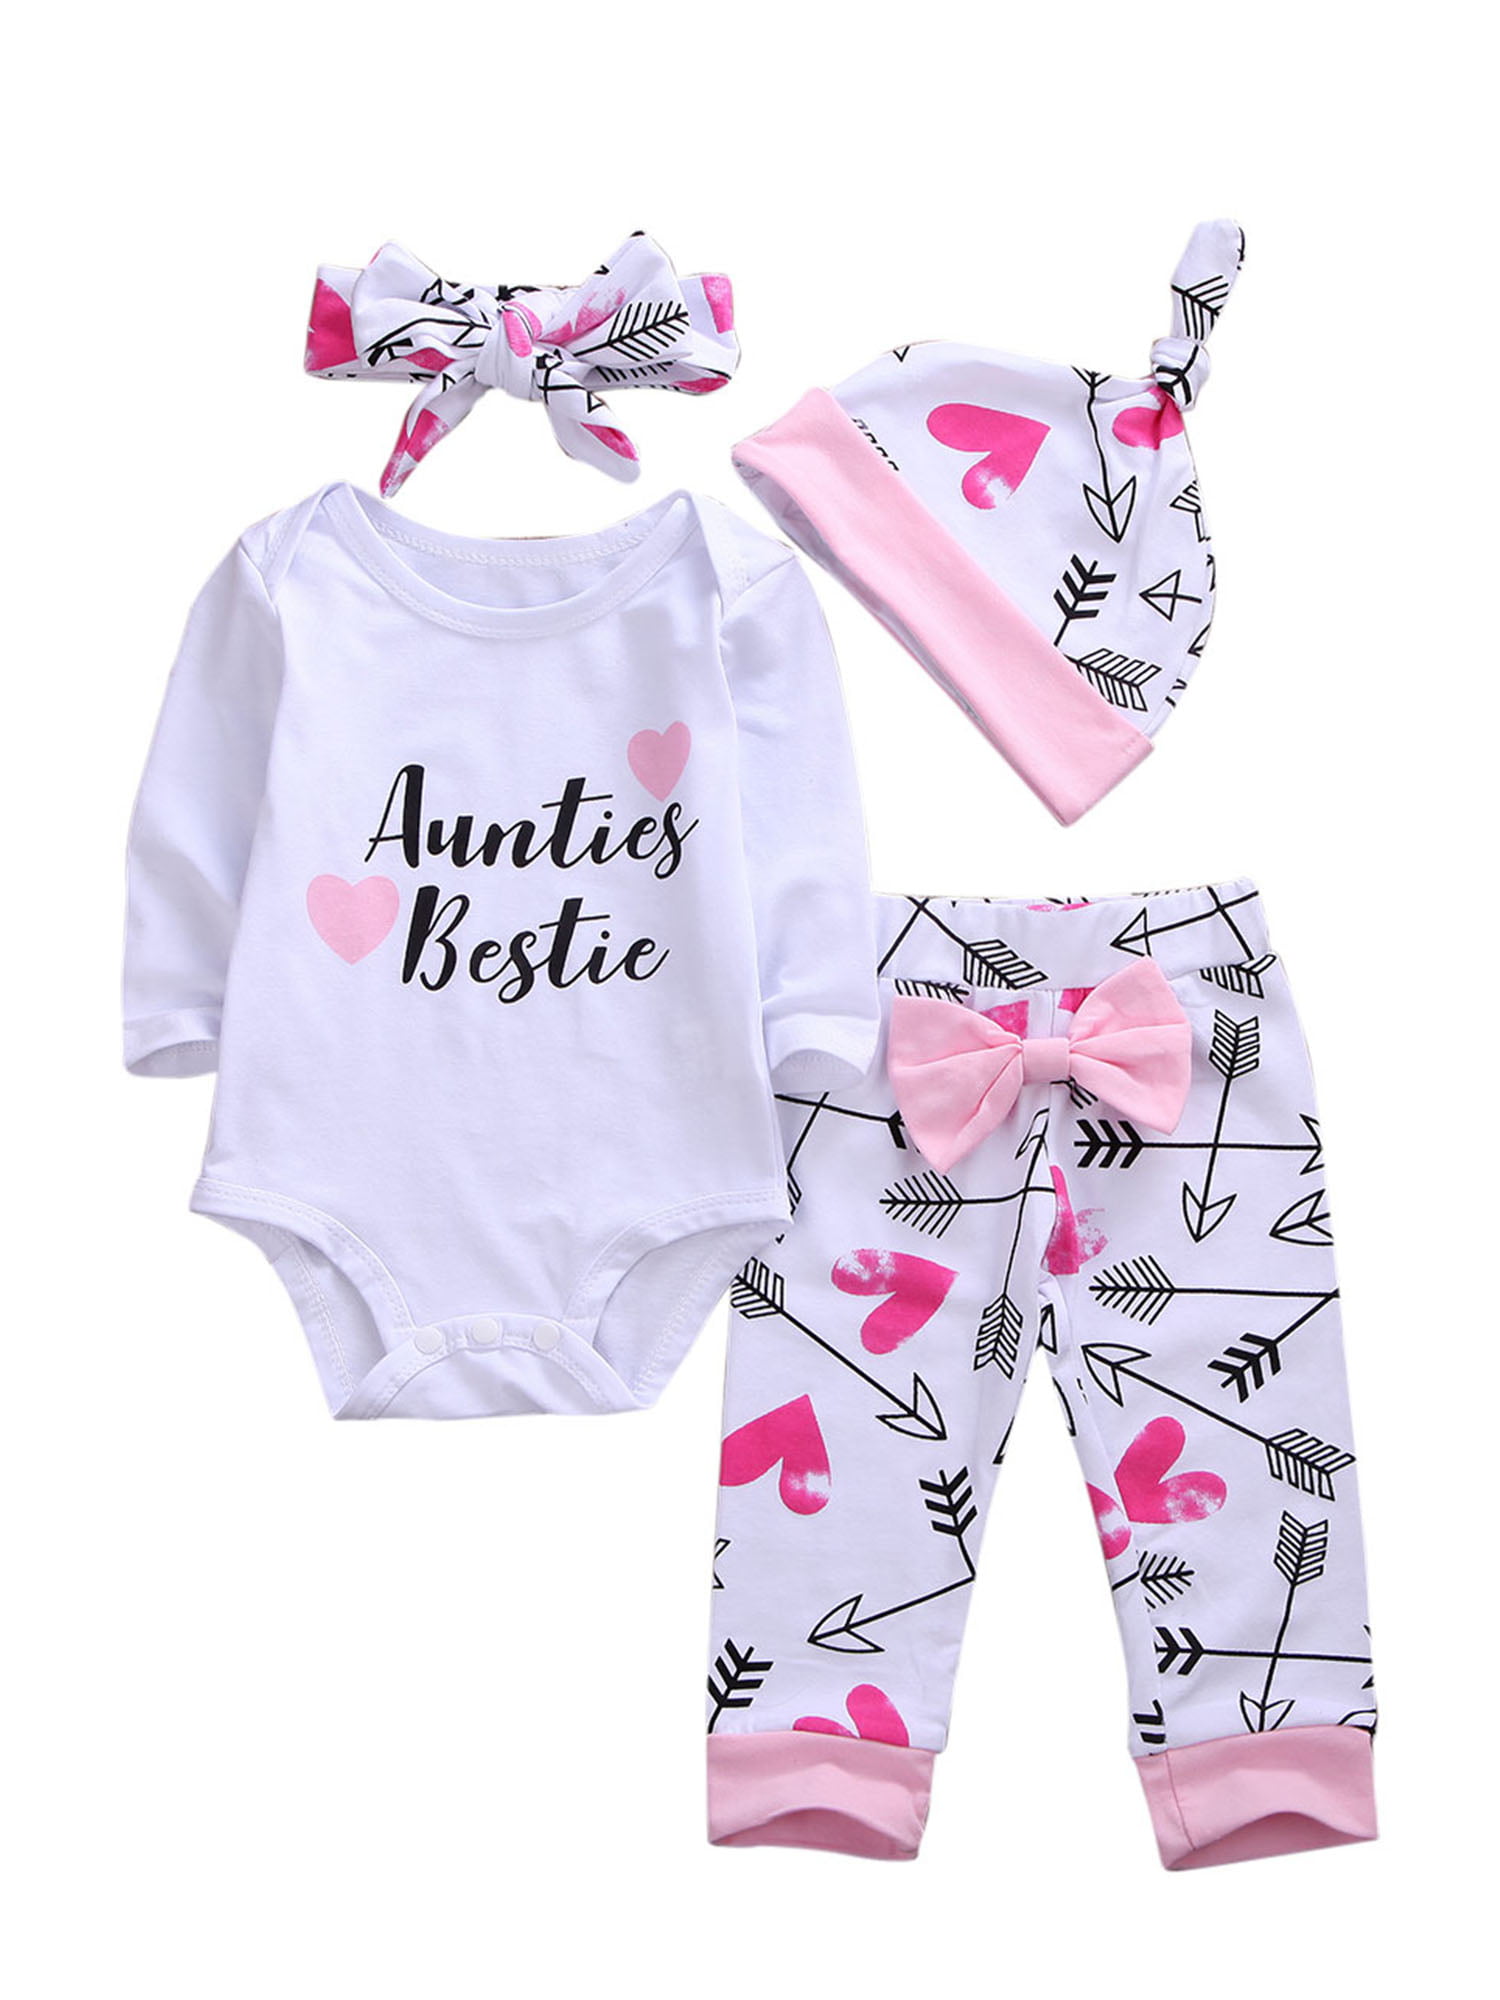 Trendy Cute Toddler Infant Baby Girls Clothes Tops+Pants+Bowknot Hat Outfits Set 